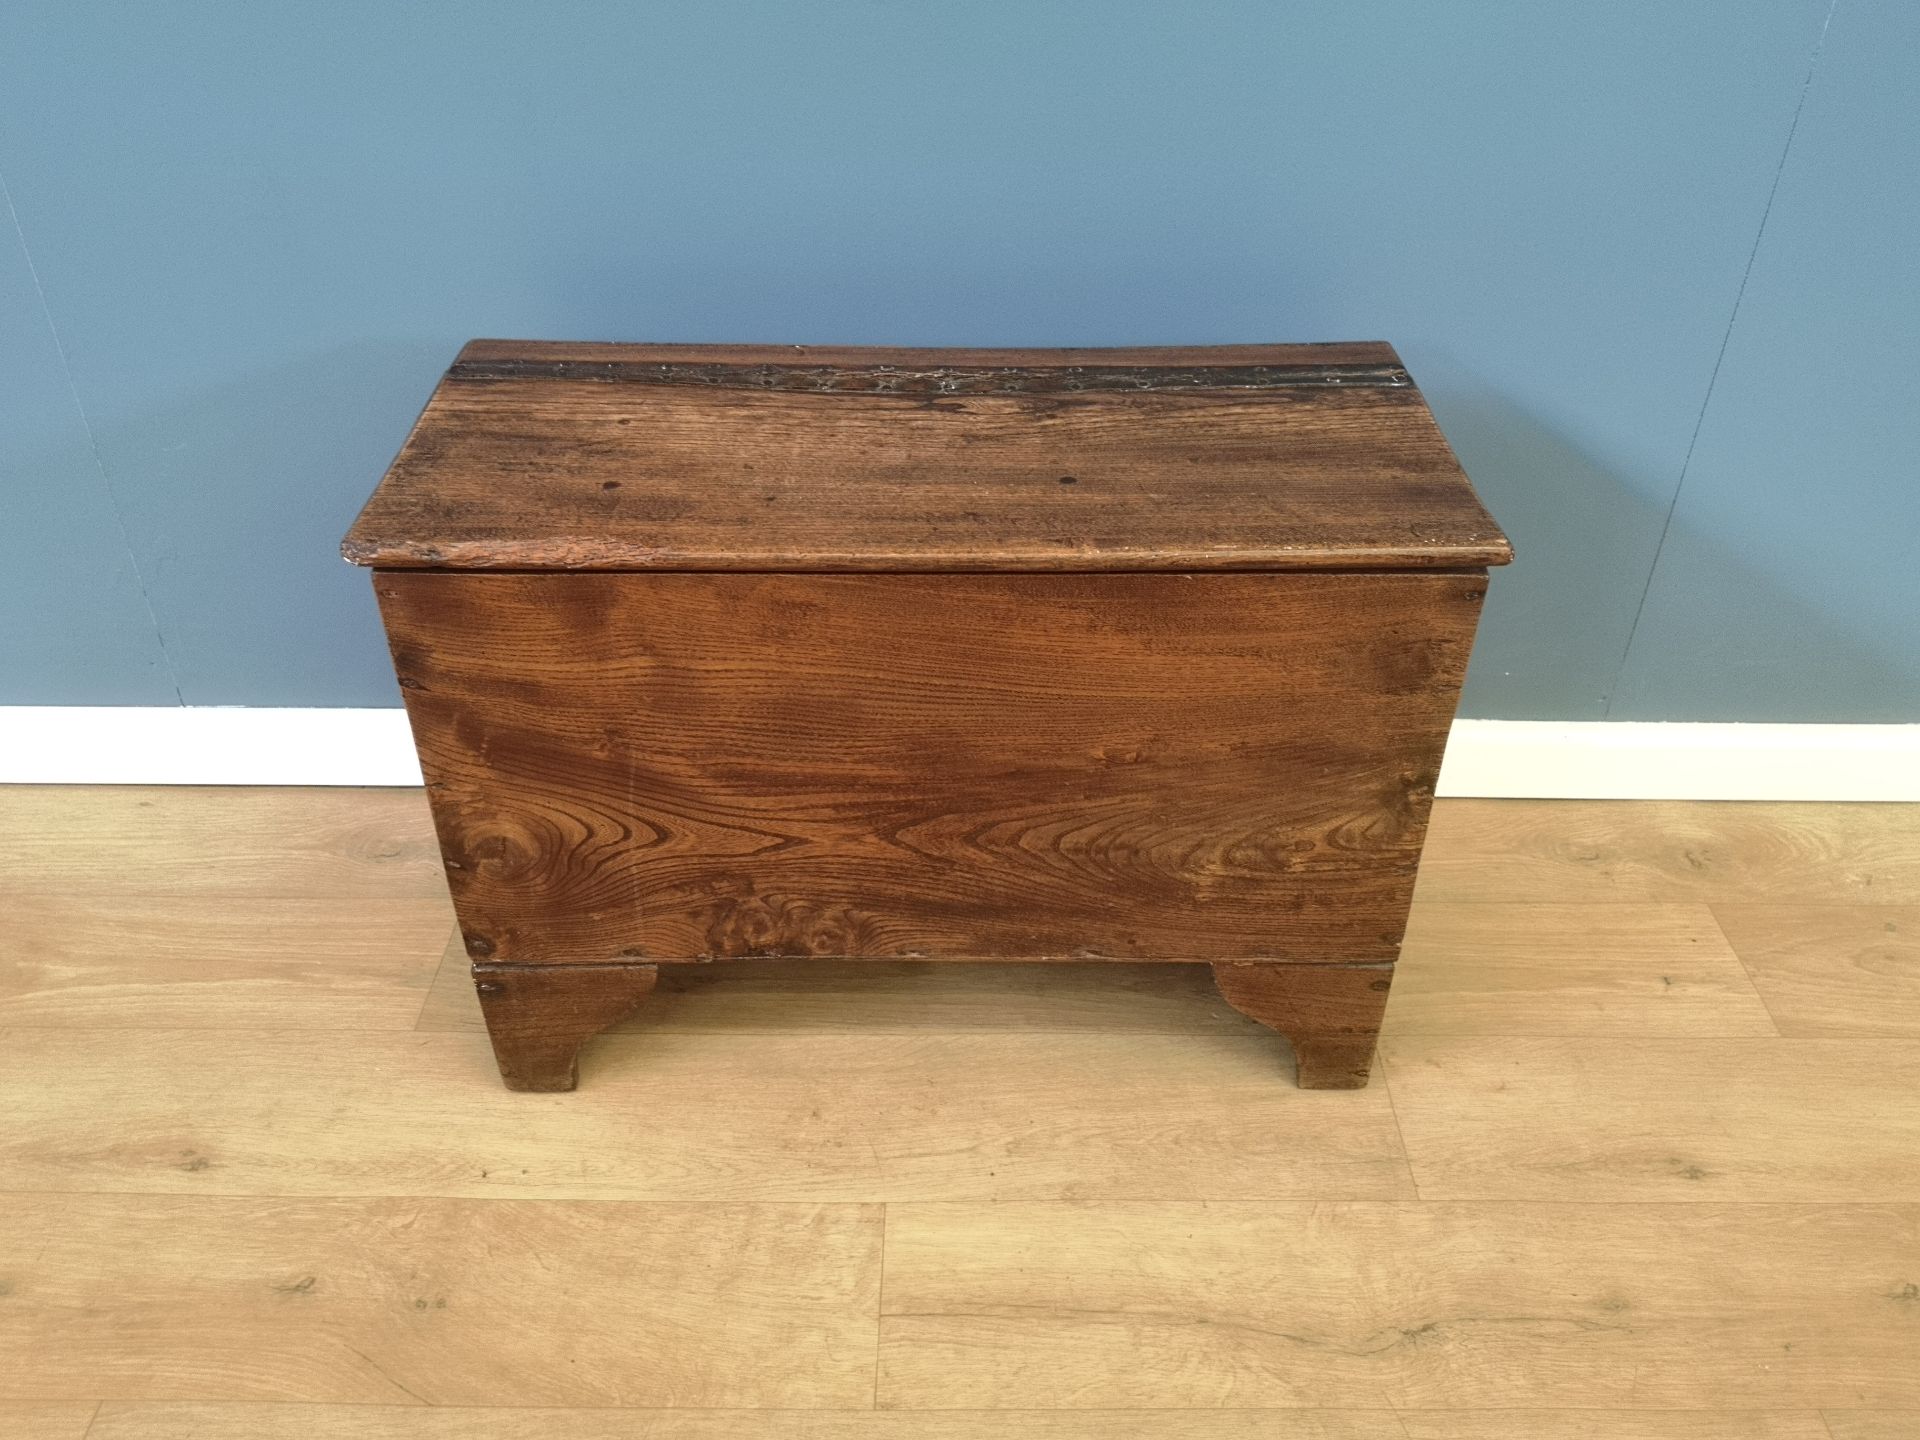 18th century oak chest with leather hinge